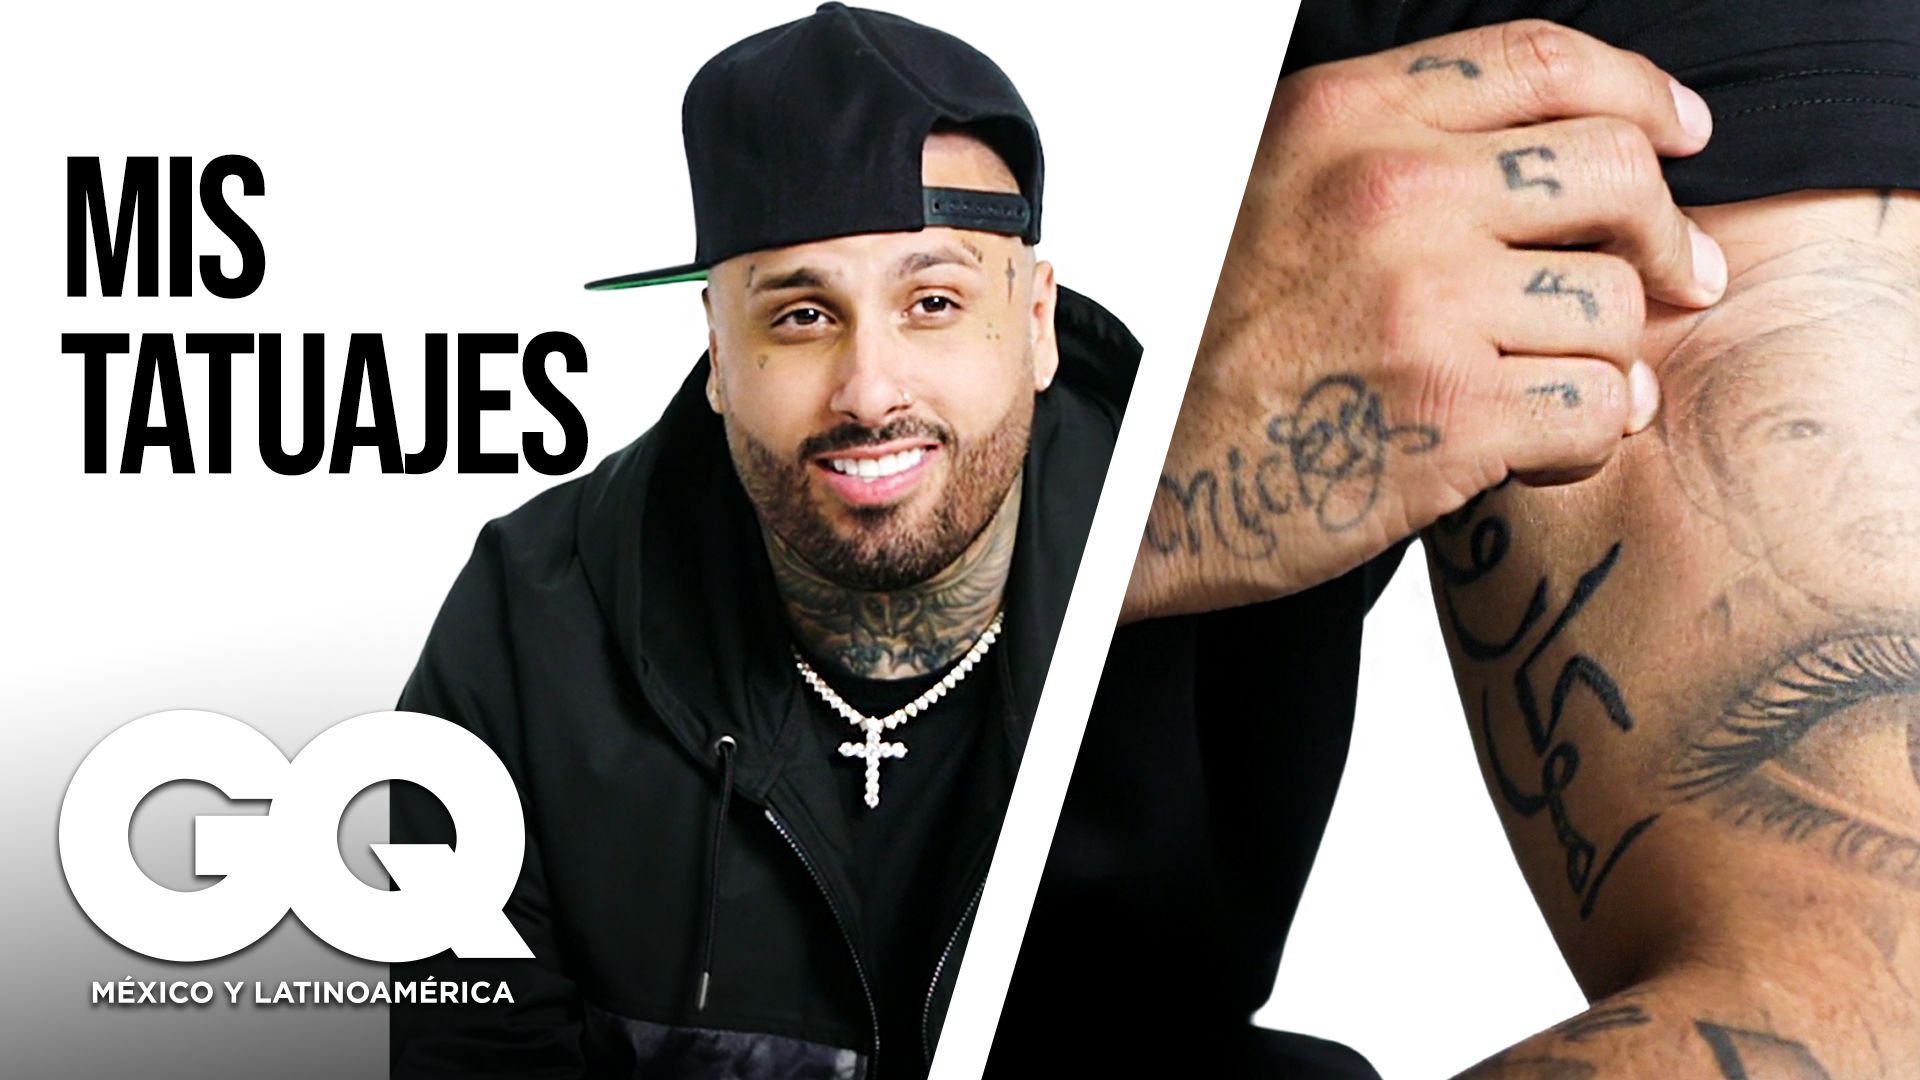 48 Hours With Nicky Jam In MedellÃ n How the City Helped Him Quit Drugs   Get Back on Top  Billboard  Billboard